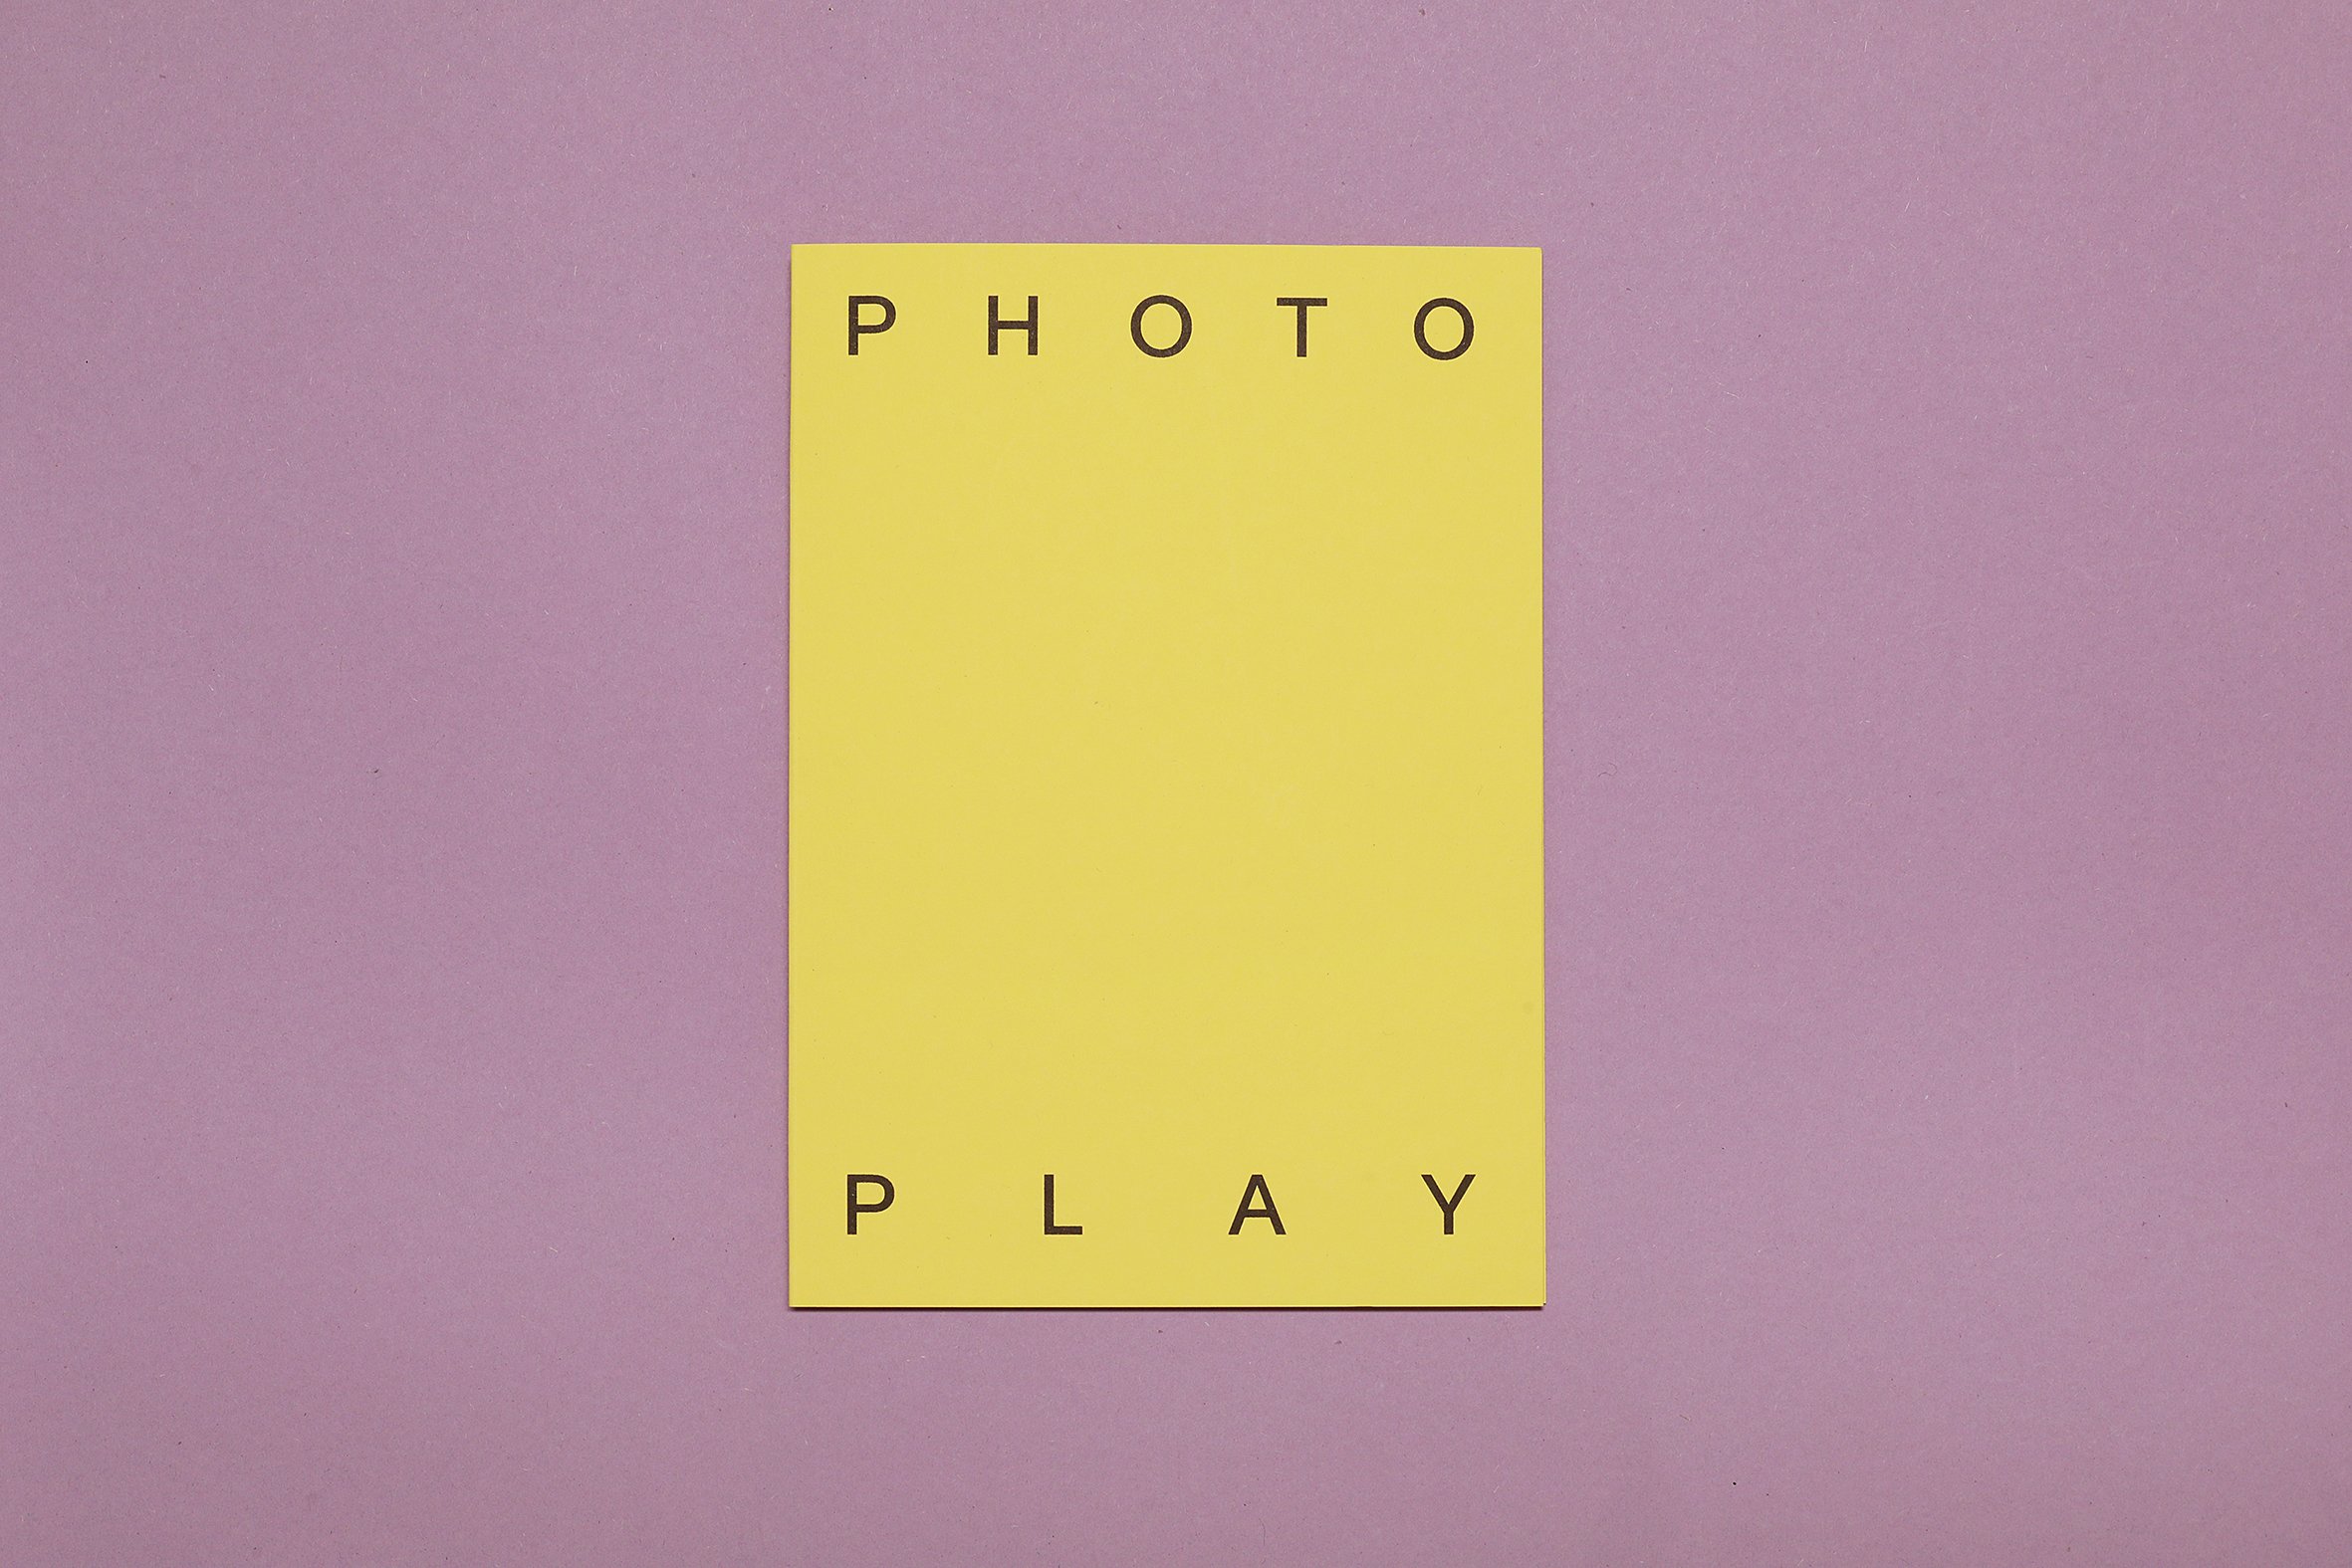  Photo Play is a book of pictures and photography activities for children and young people focusing on play. Design by Chris Neophytou. 2022 